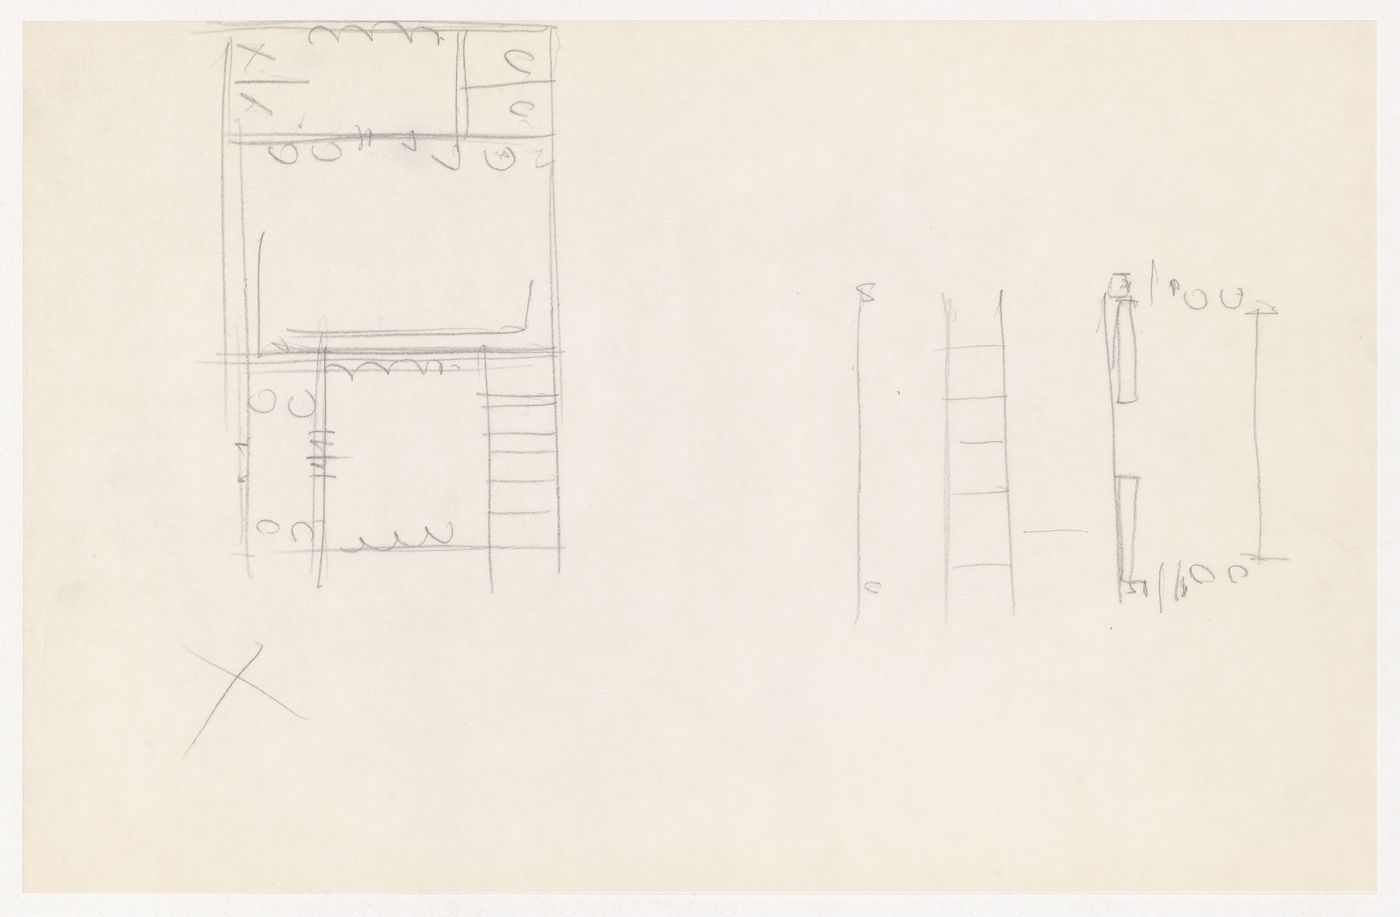 Partial sketch plans for the Metallurgy Building, Illinois Institute of Technology, Chicago